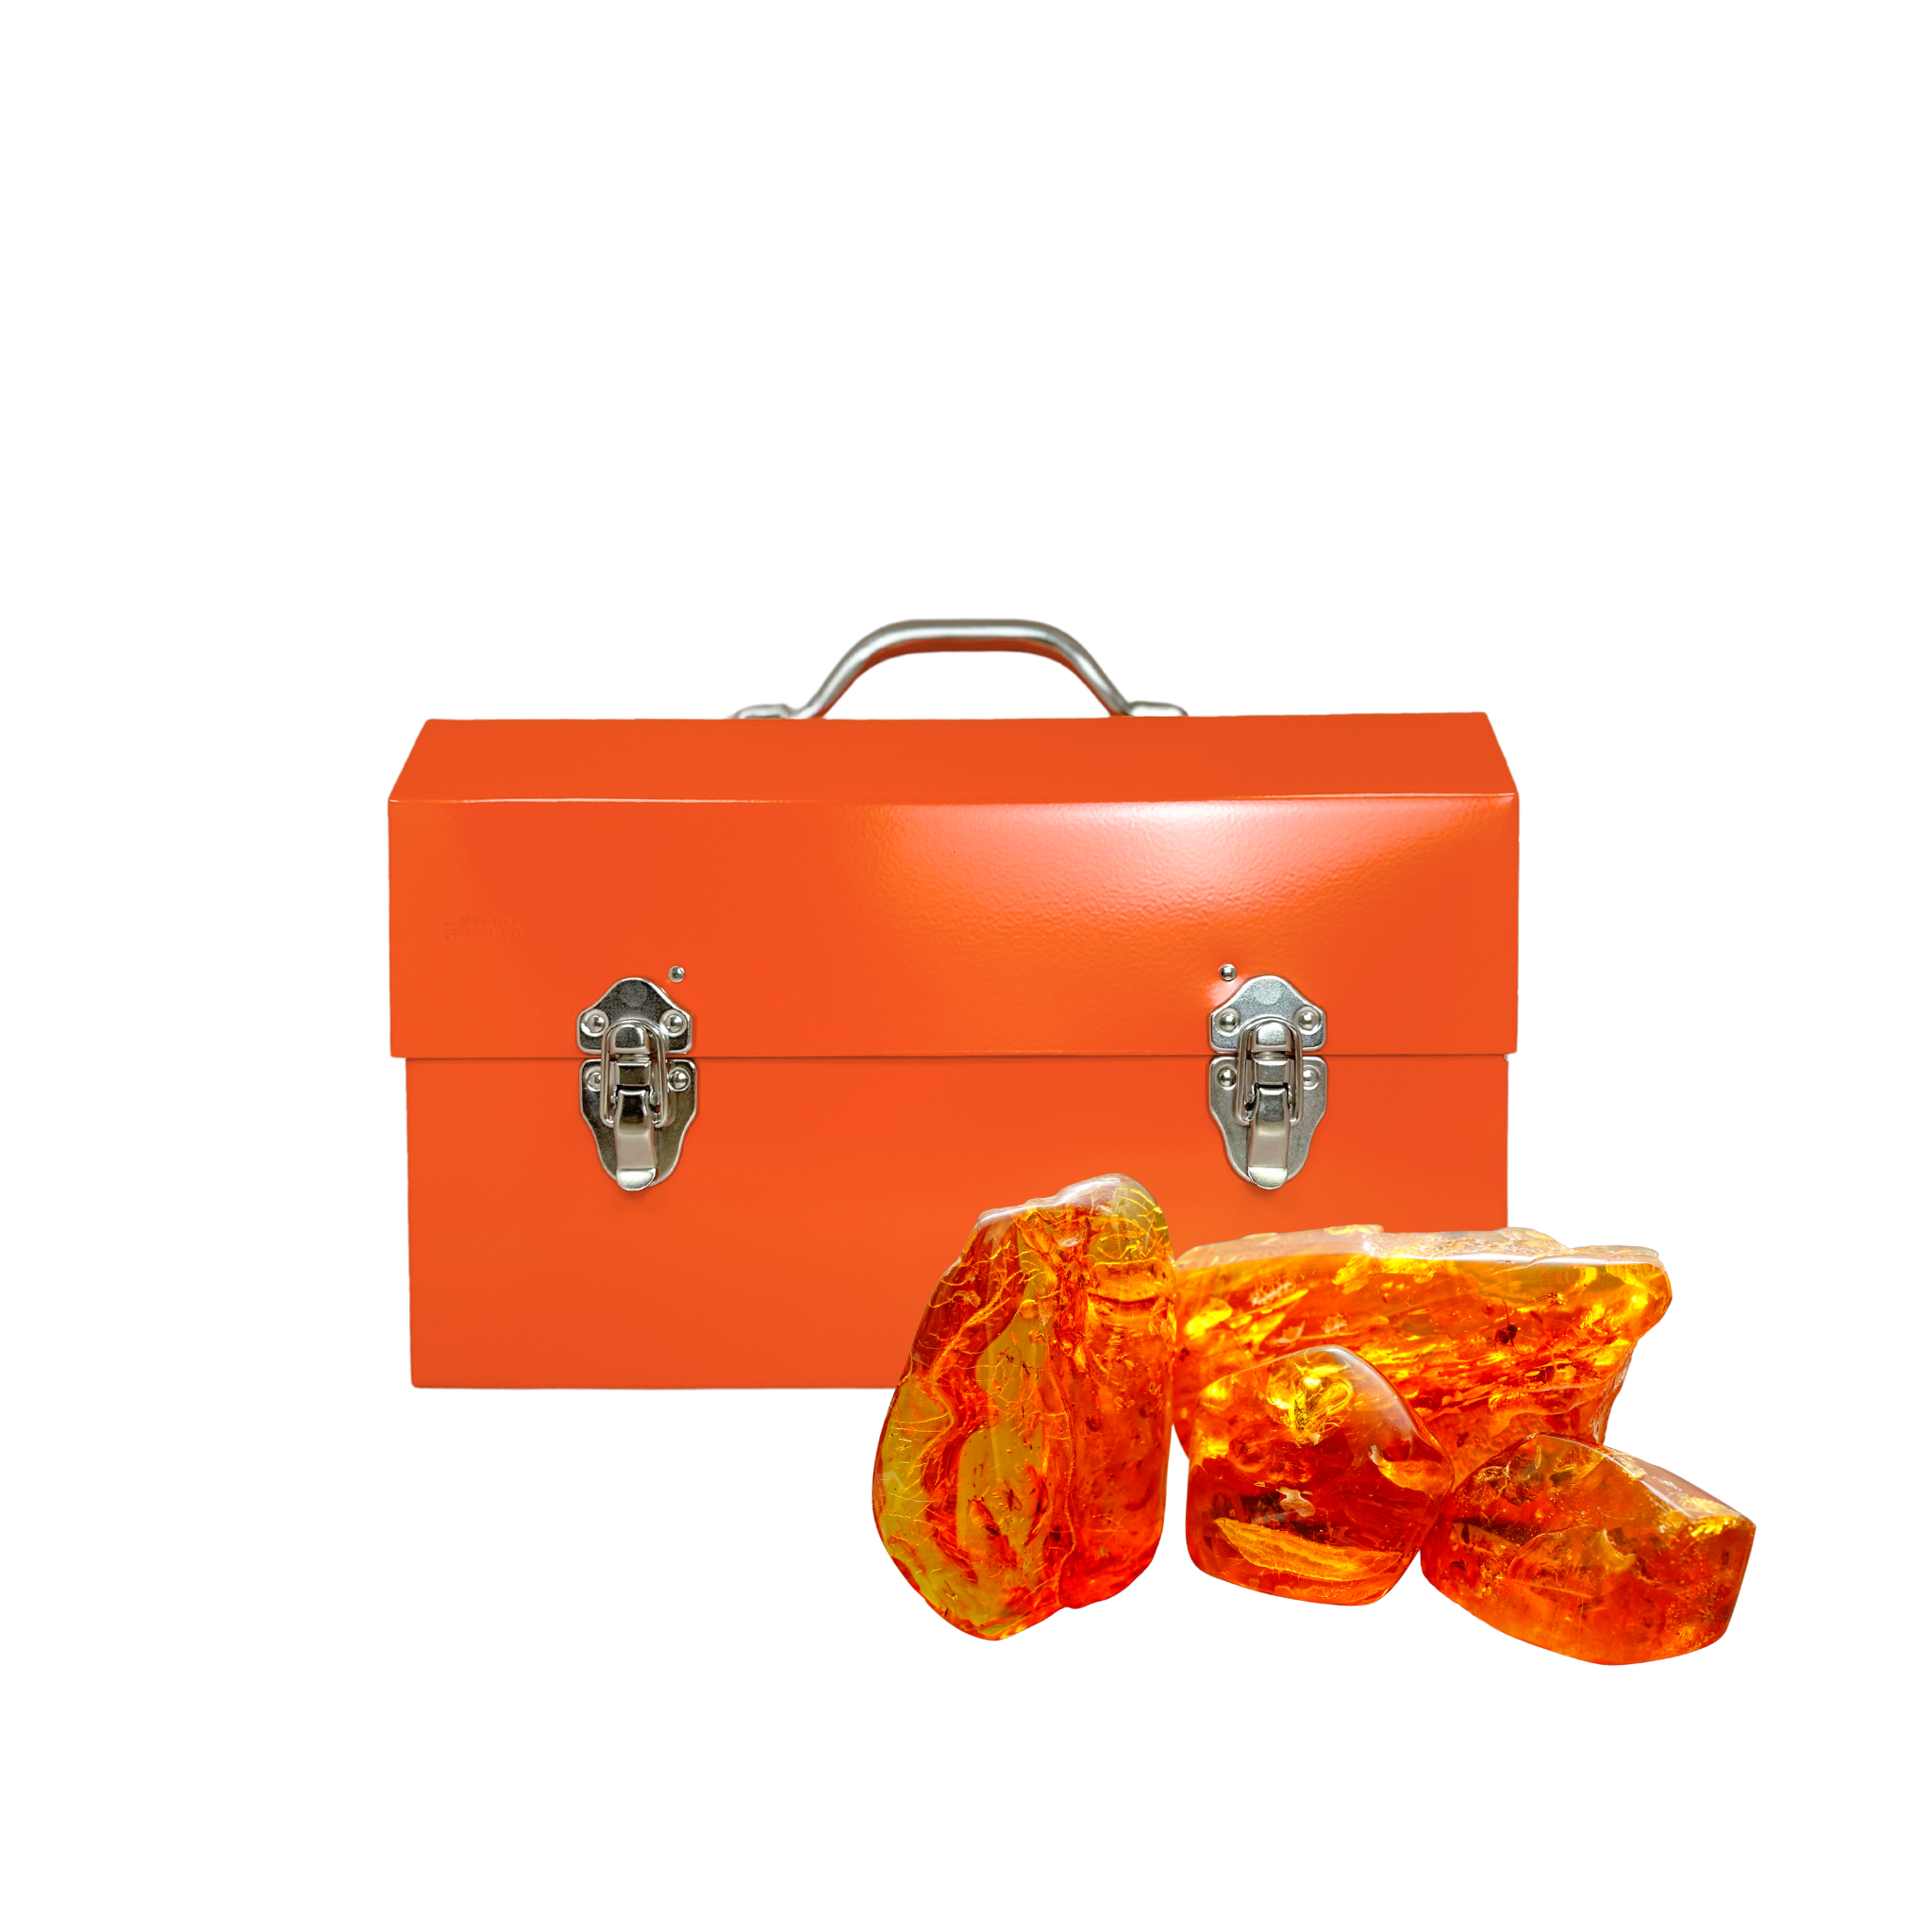 L. May aluminum lunchbox powder coated in orange for the gemstone amber collection